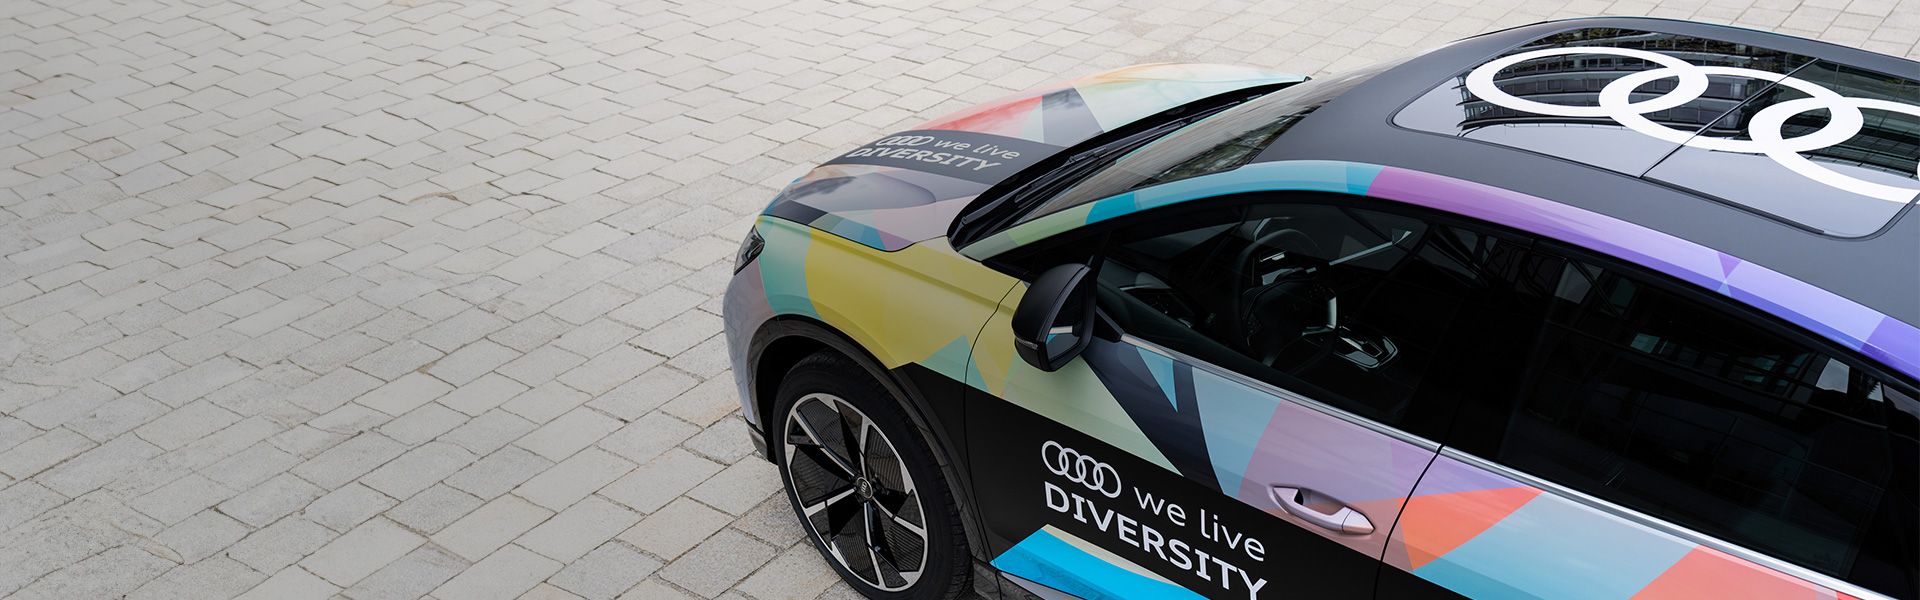 Audi vehicle with “Diversity and Inclusion” wrap